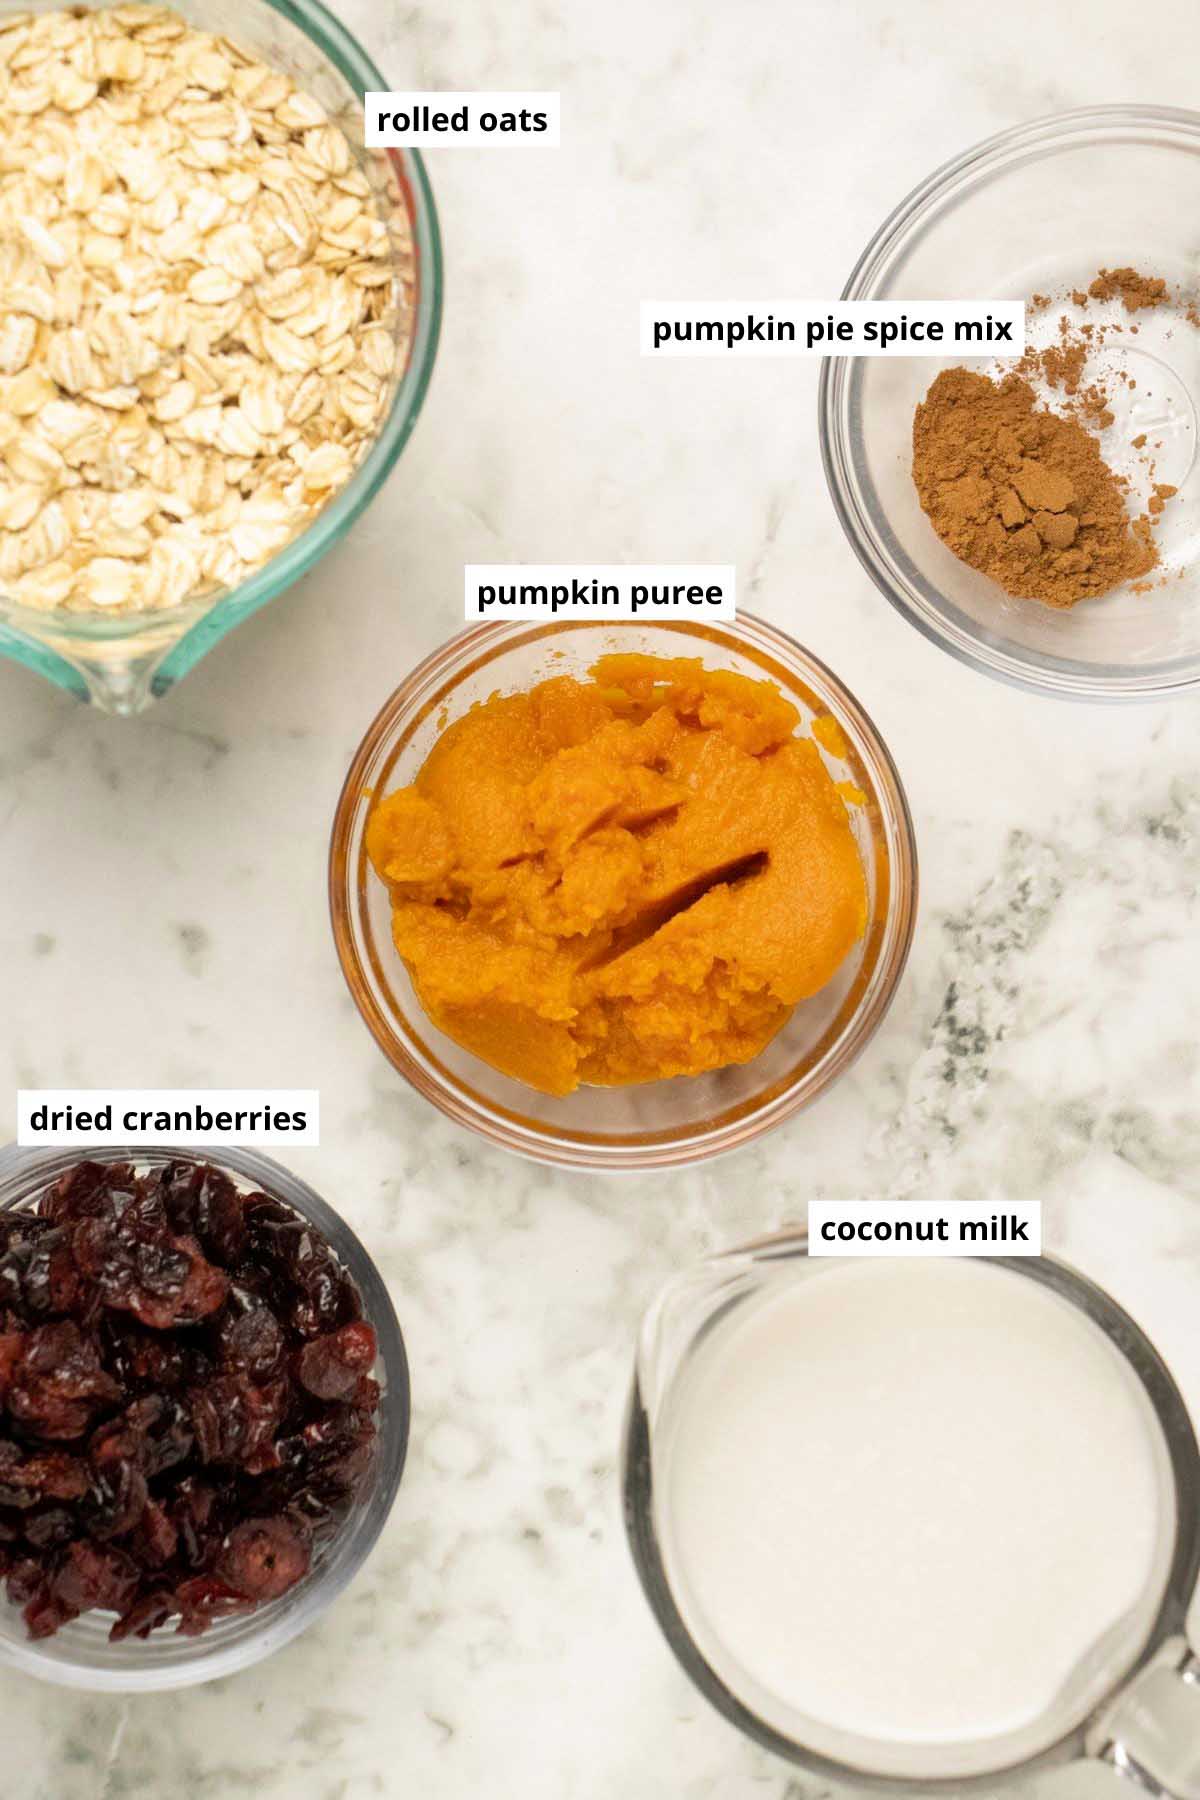 oats, pumpkin, pumpkin spice, dried cranberries, and coconut milk in cups on a white table with text labels